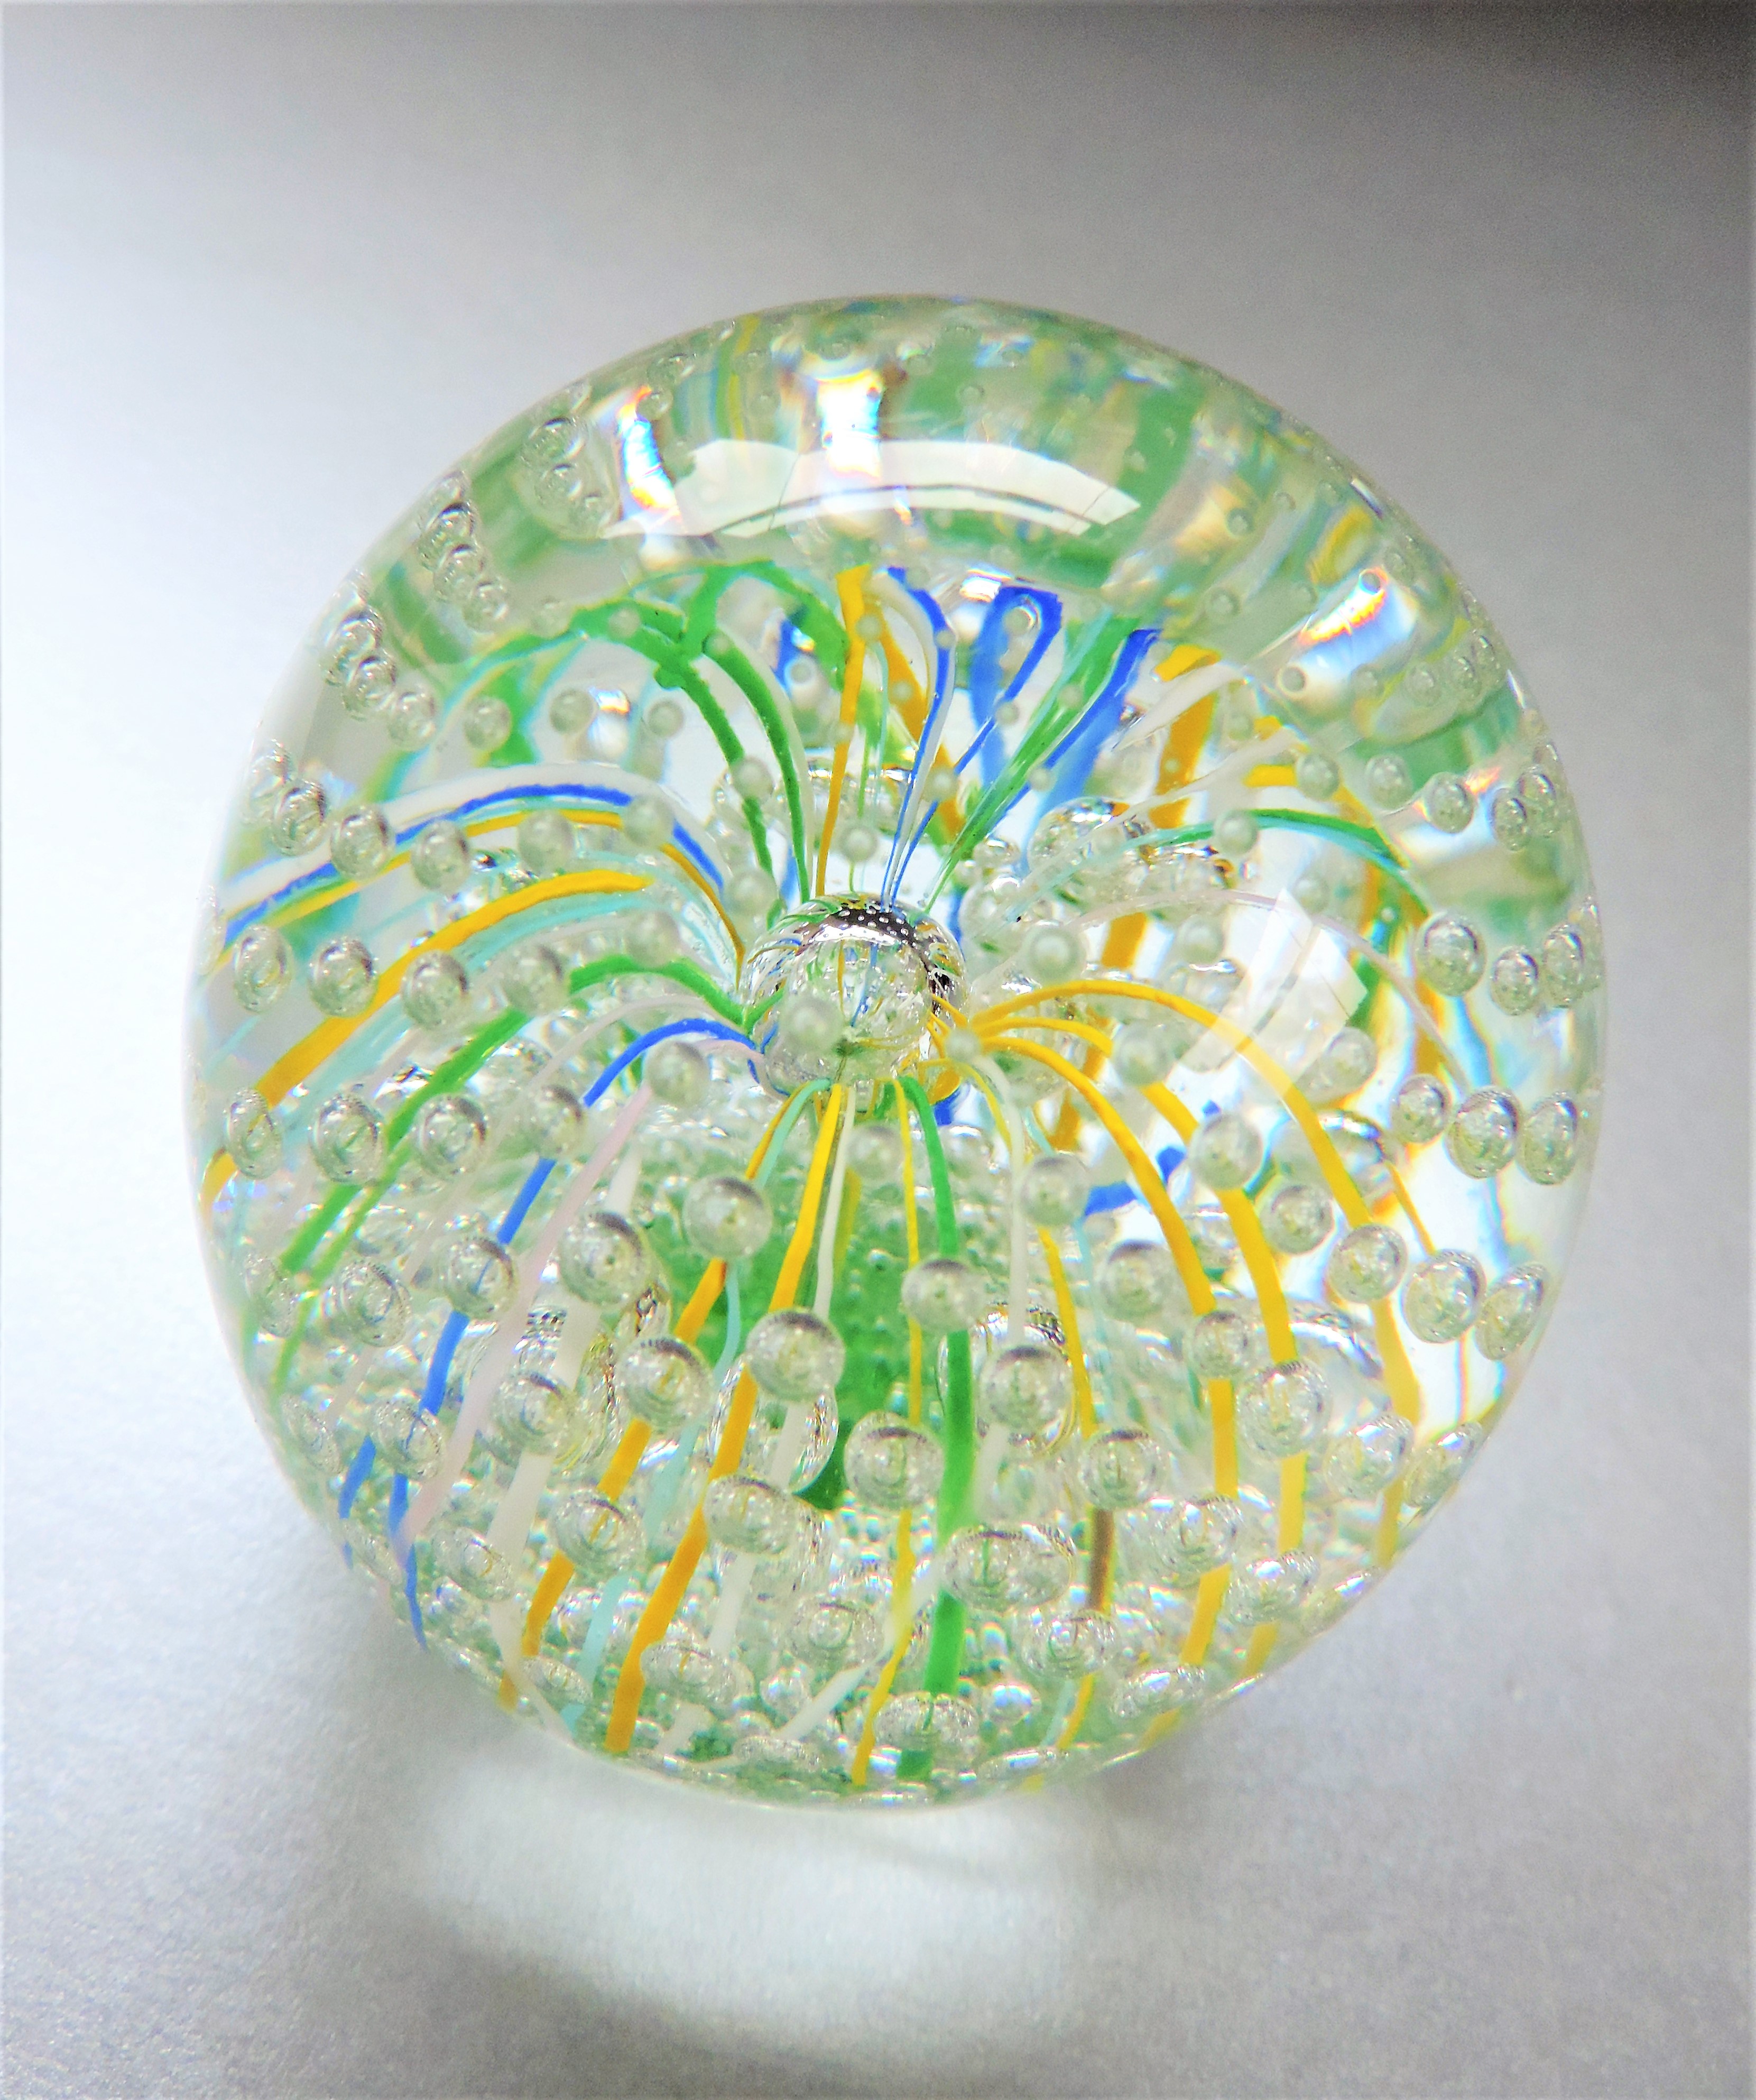 Art Glass Paperweight Bubbles & Fireworks - Image 2 of 4